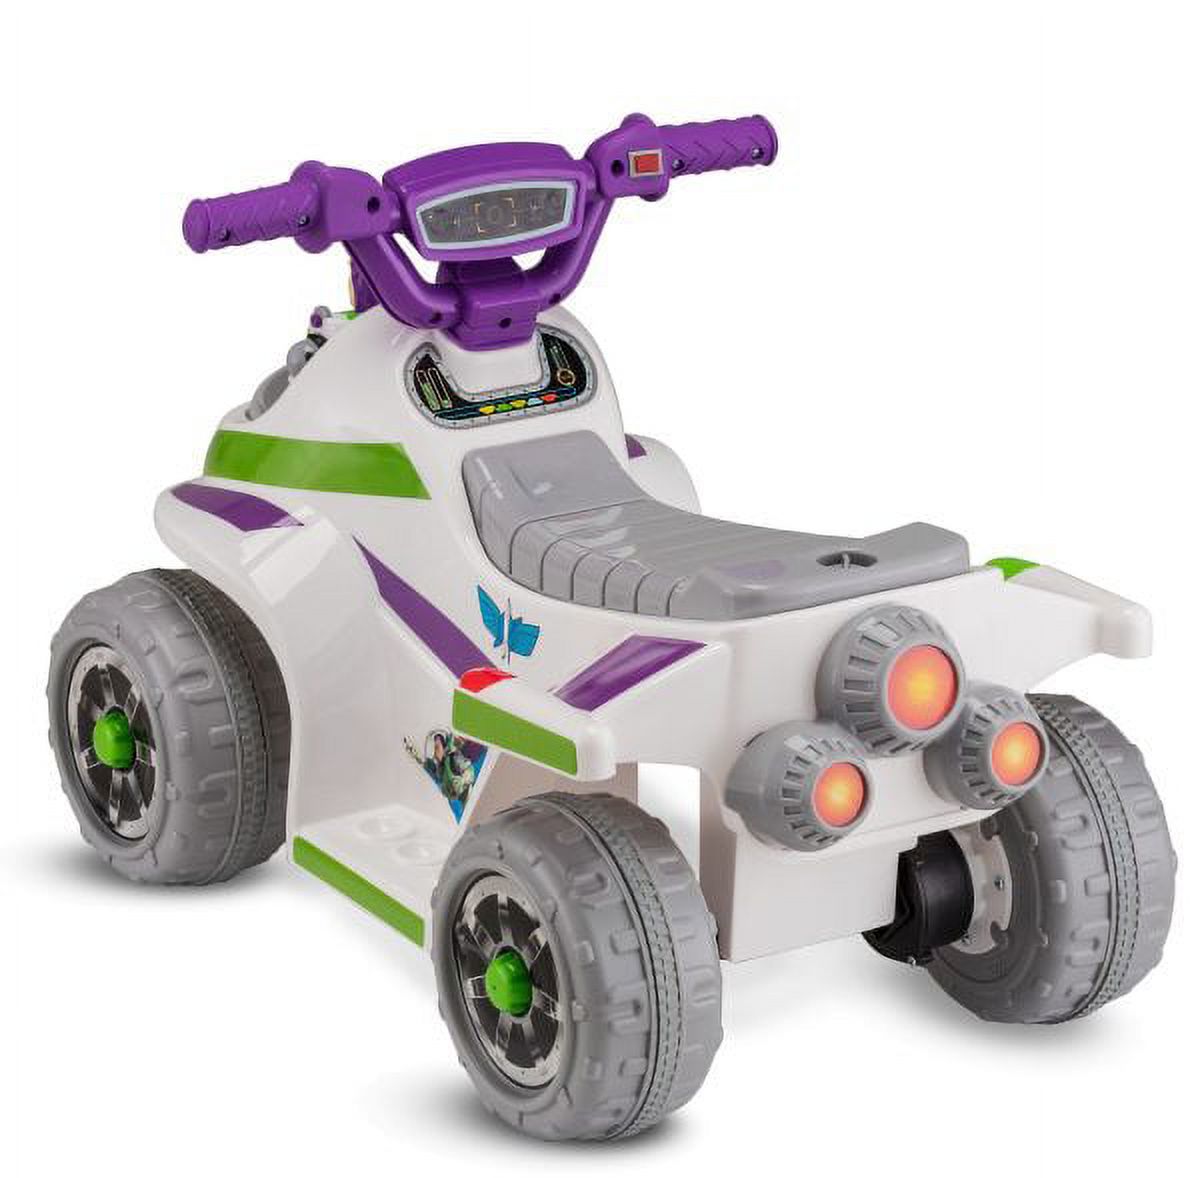 Pacific Cycle 6v Toy Story Buzz Lightyear Quad - image 3 of 7